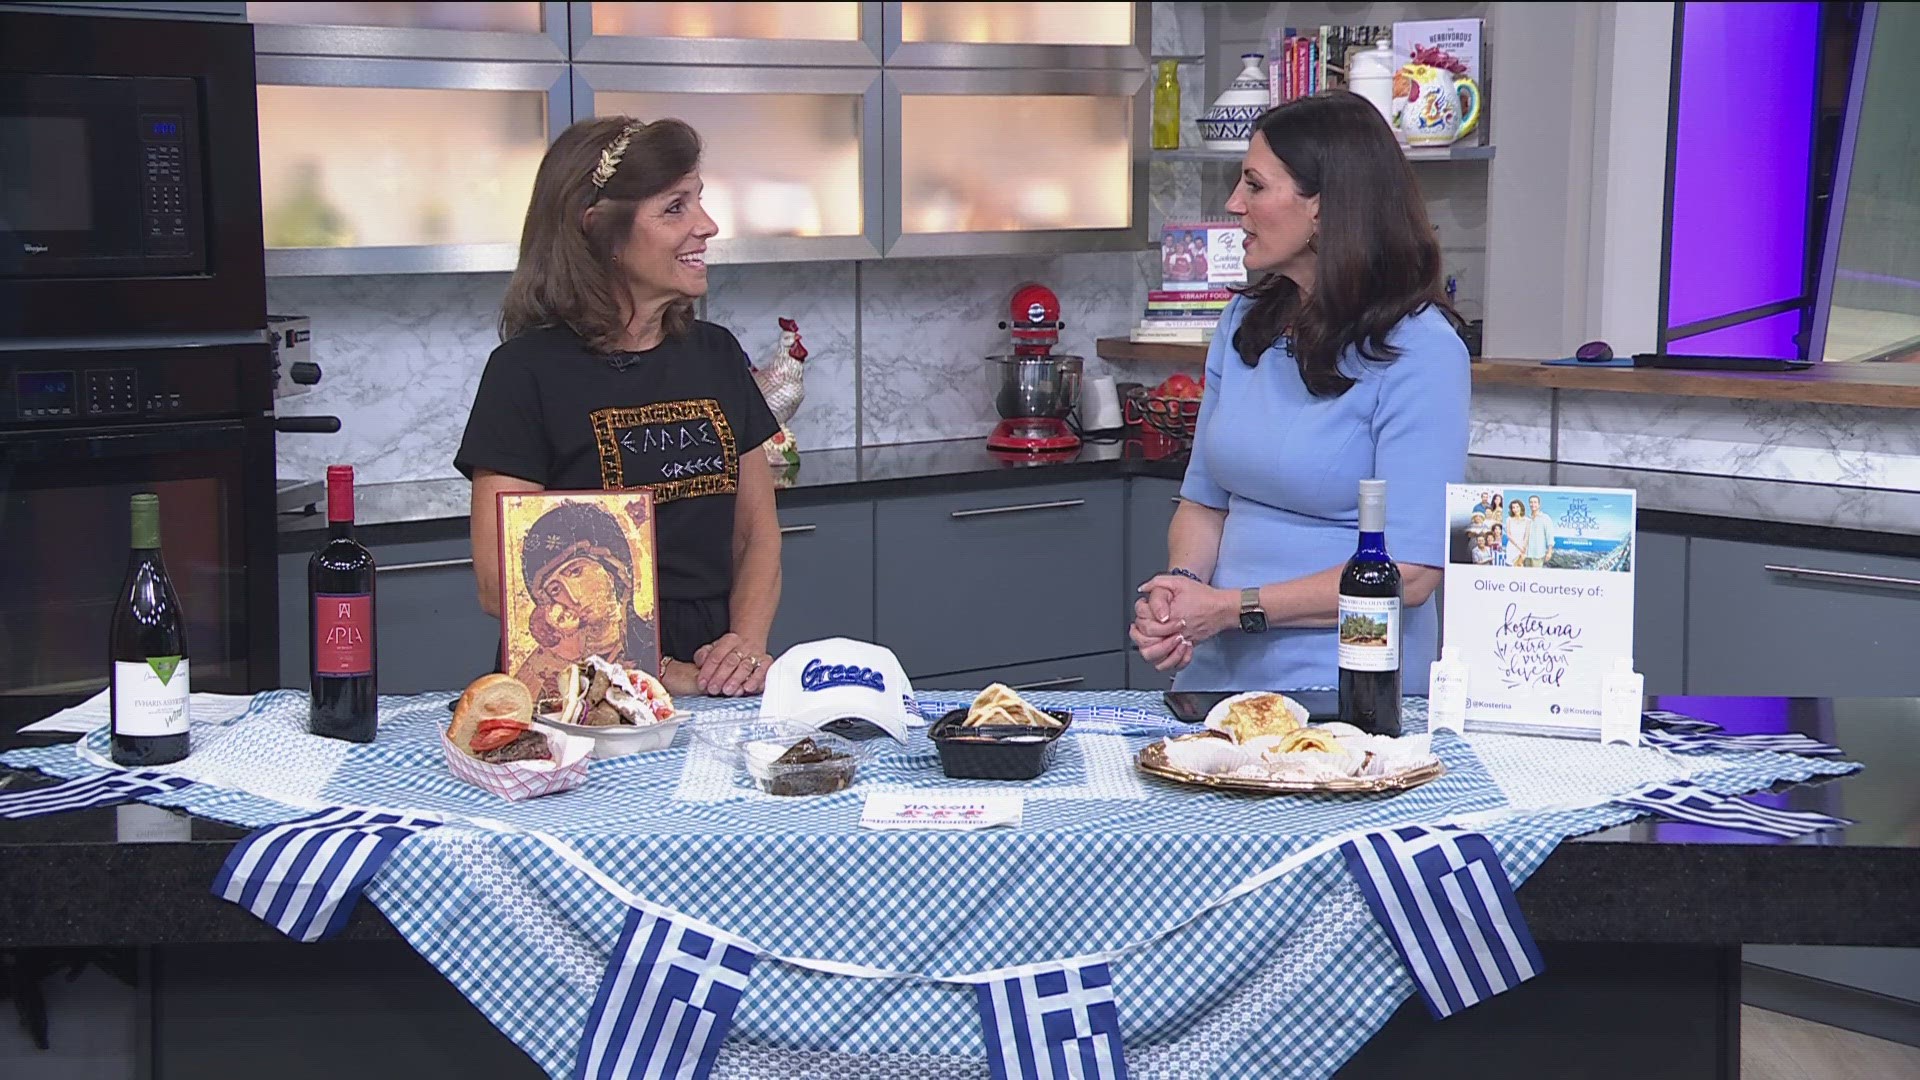 The event is hosted by St. Mary's Greek Orthodox Church. Elana Gabor joined Rena to share all the details.